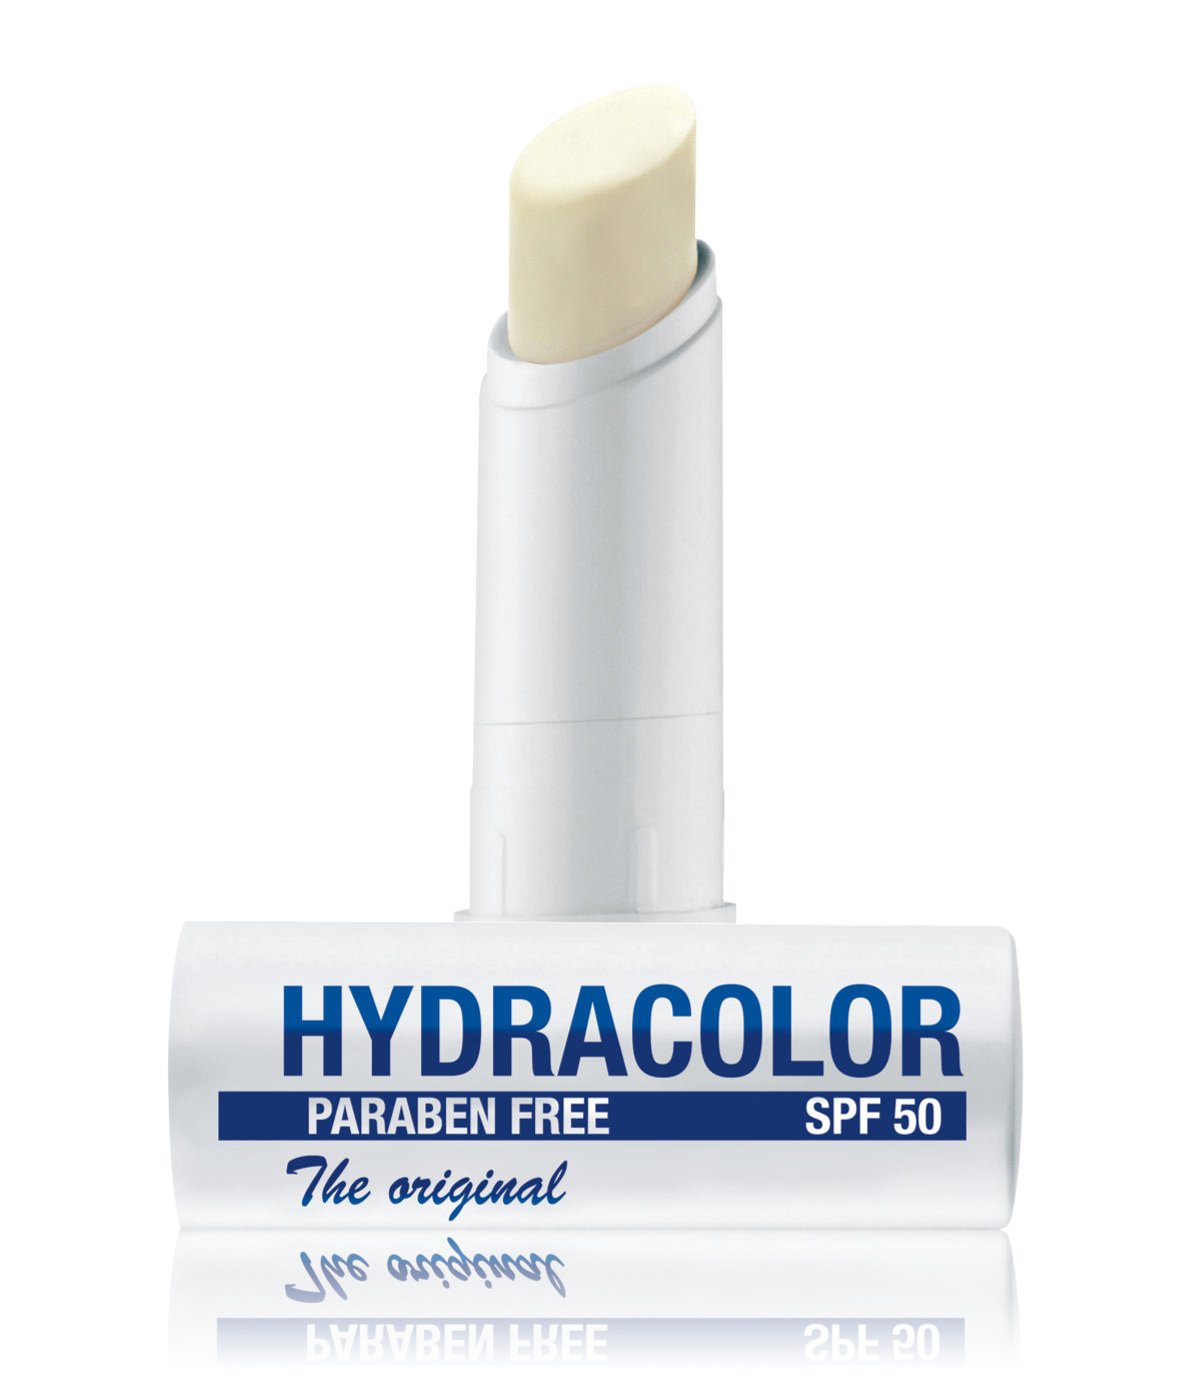 Hydracolor unisex LSF50